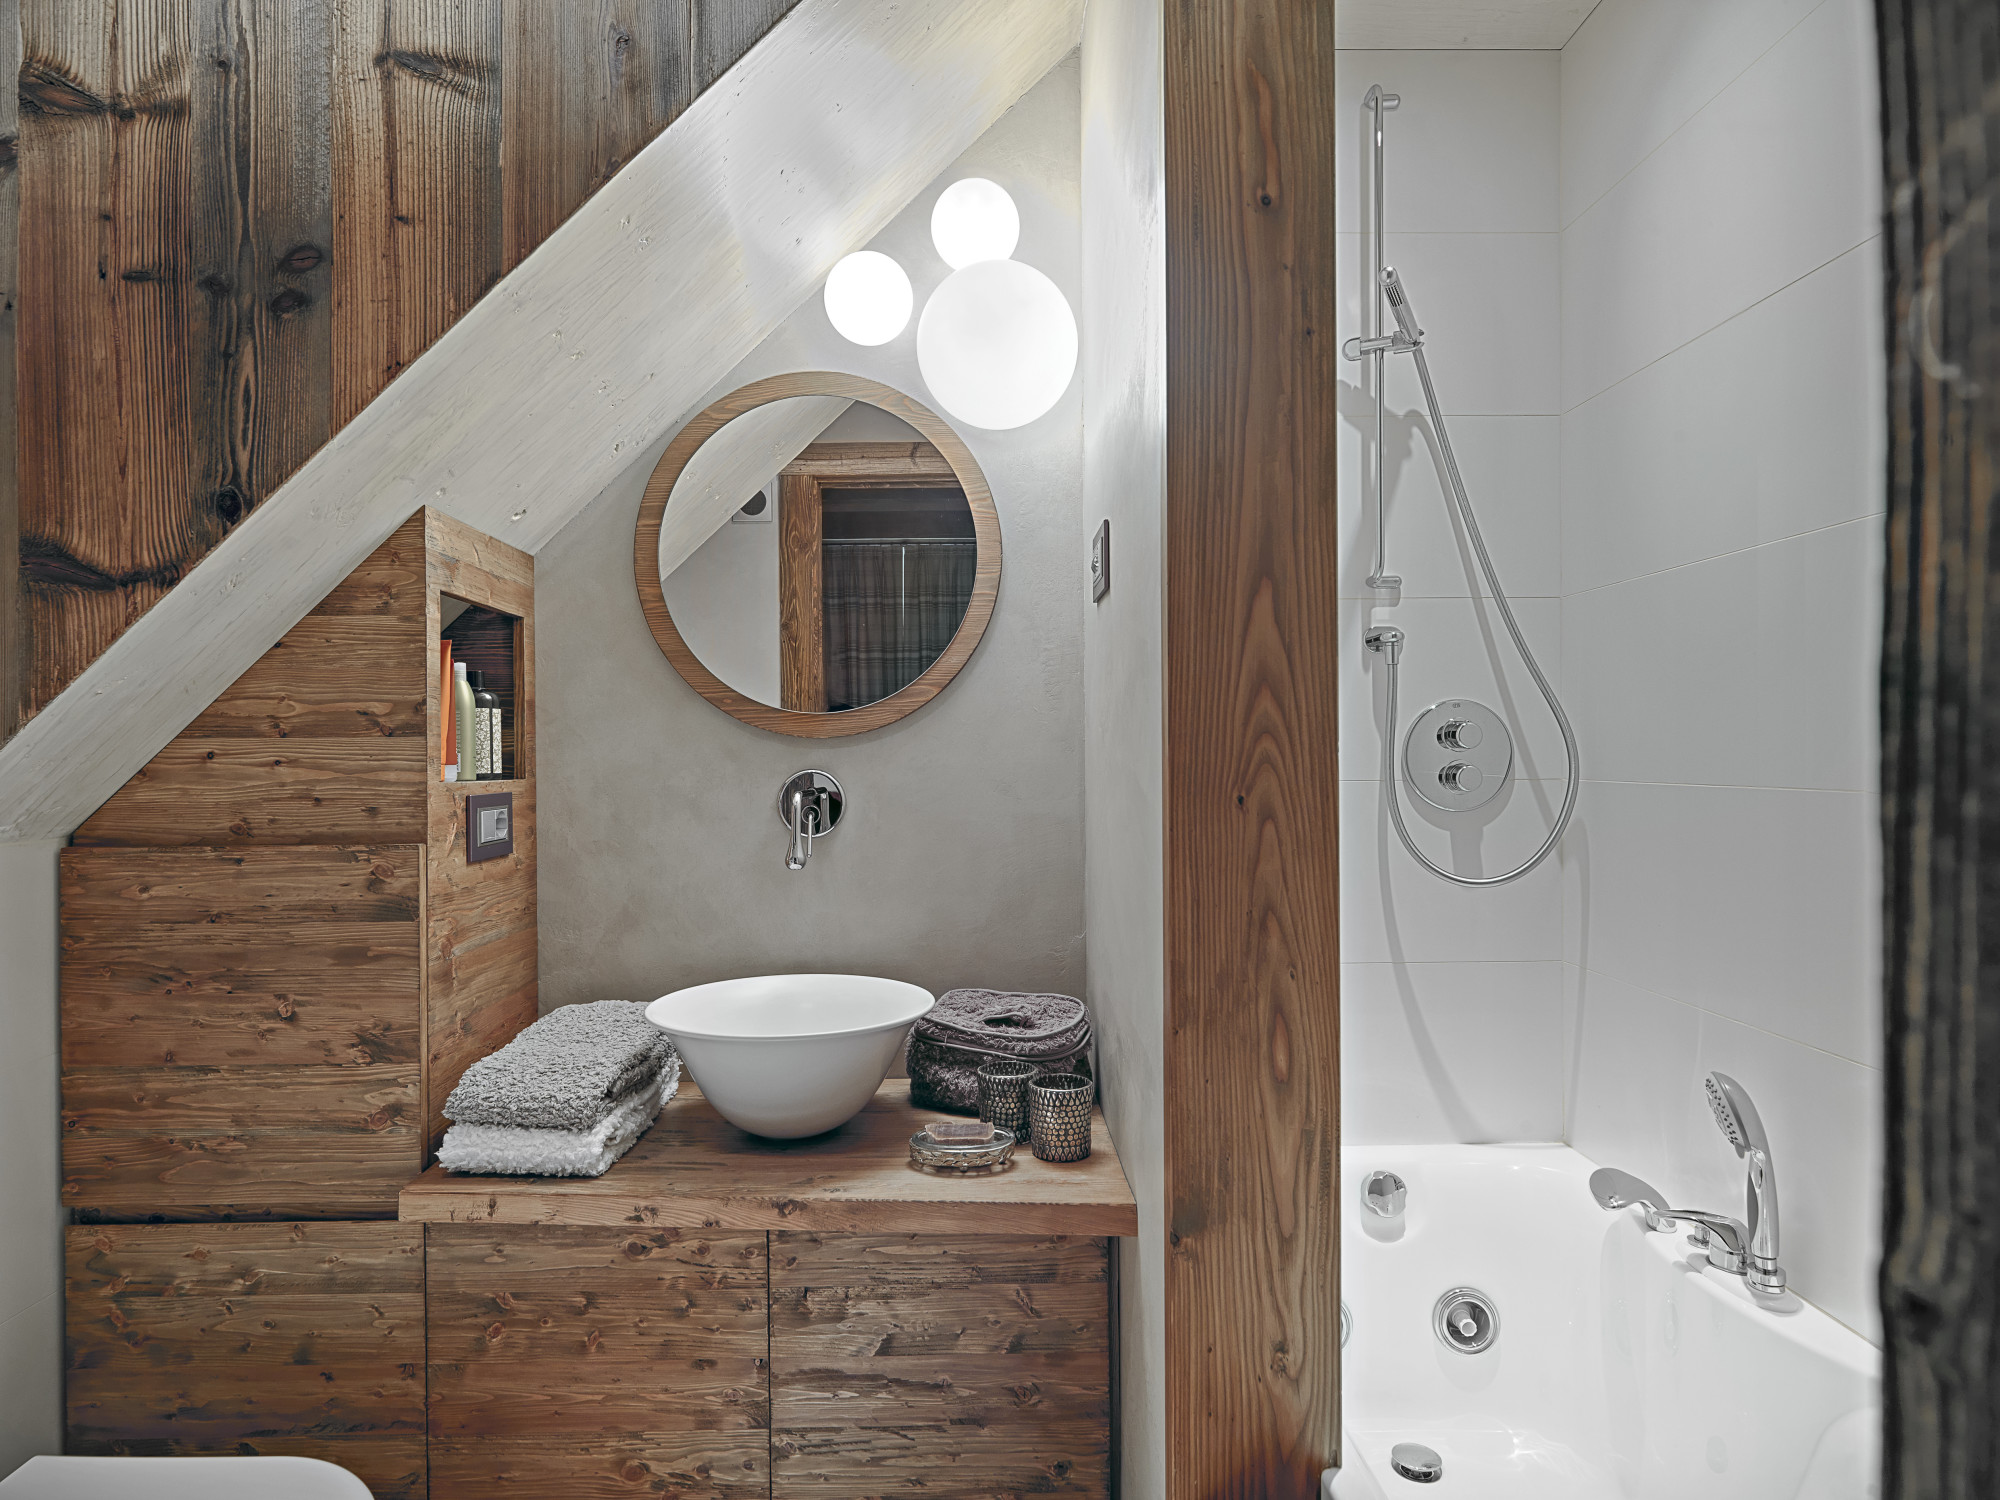 Comfy, Cozy Rustic: 7 Tips for the Perfect Rustic Bathroom